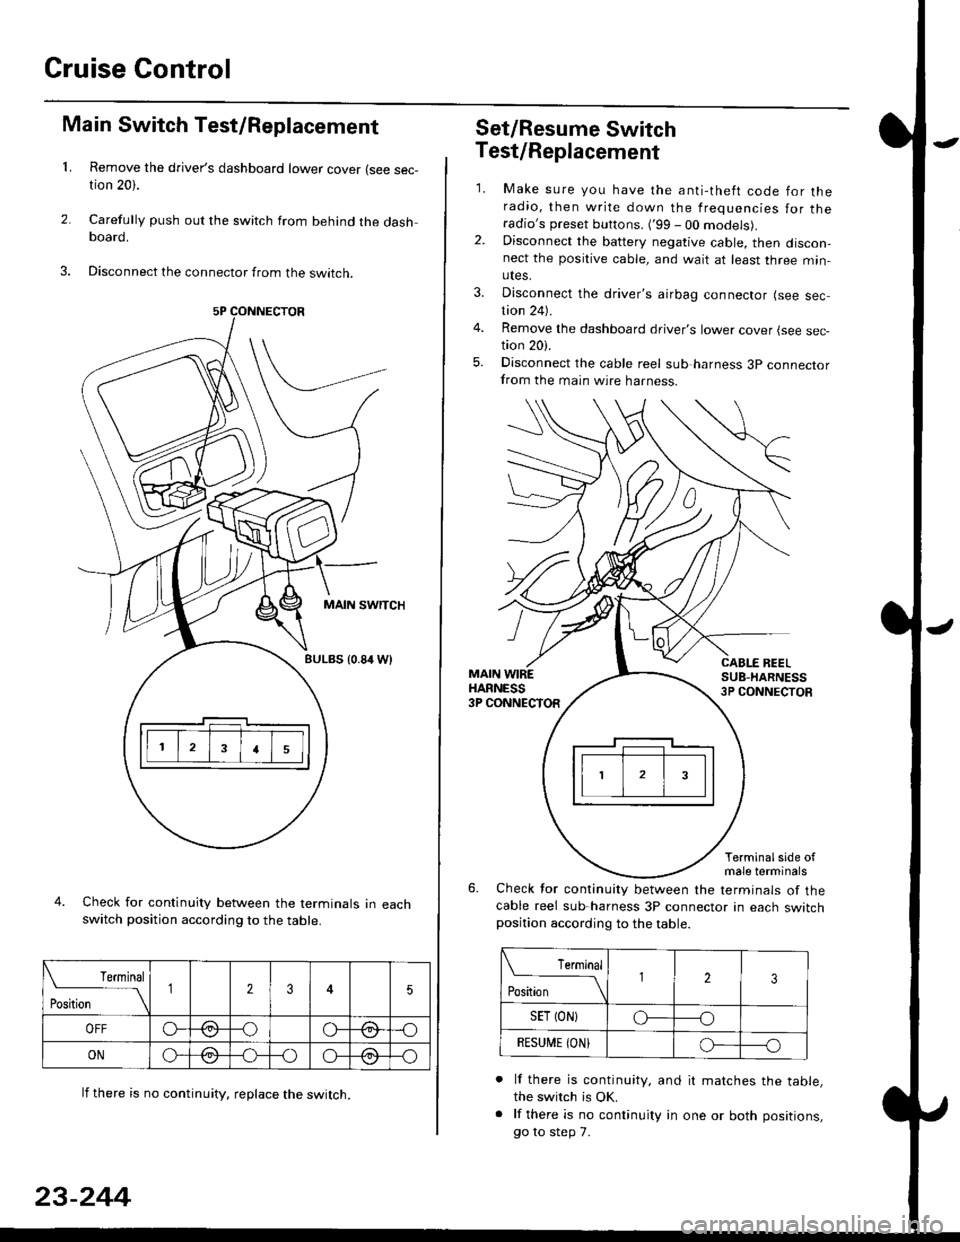 HONDA CIVIC 1996 6.G Workshop Manual Cruise Gontrol
3.
1.
2.
Main Switch Test/Replacement
Remove the drivers dashboard lower cover (see sec-tion 20).
Carefully push out the switch from behind the dashboard.
Disconnect the connector from